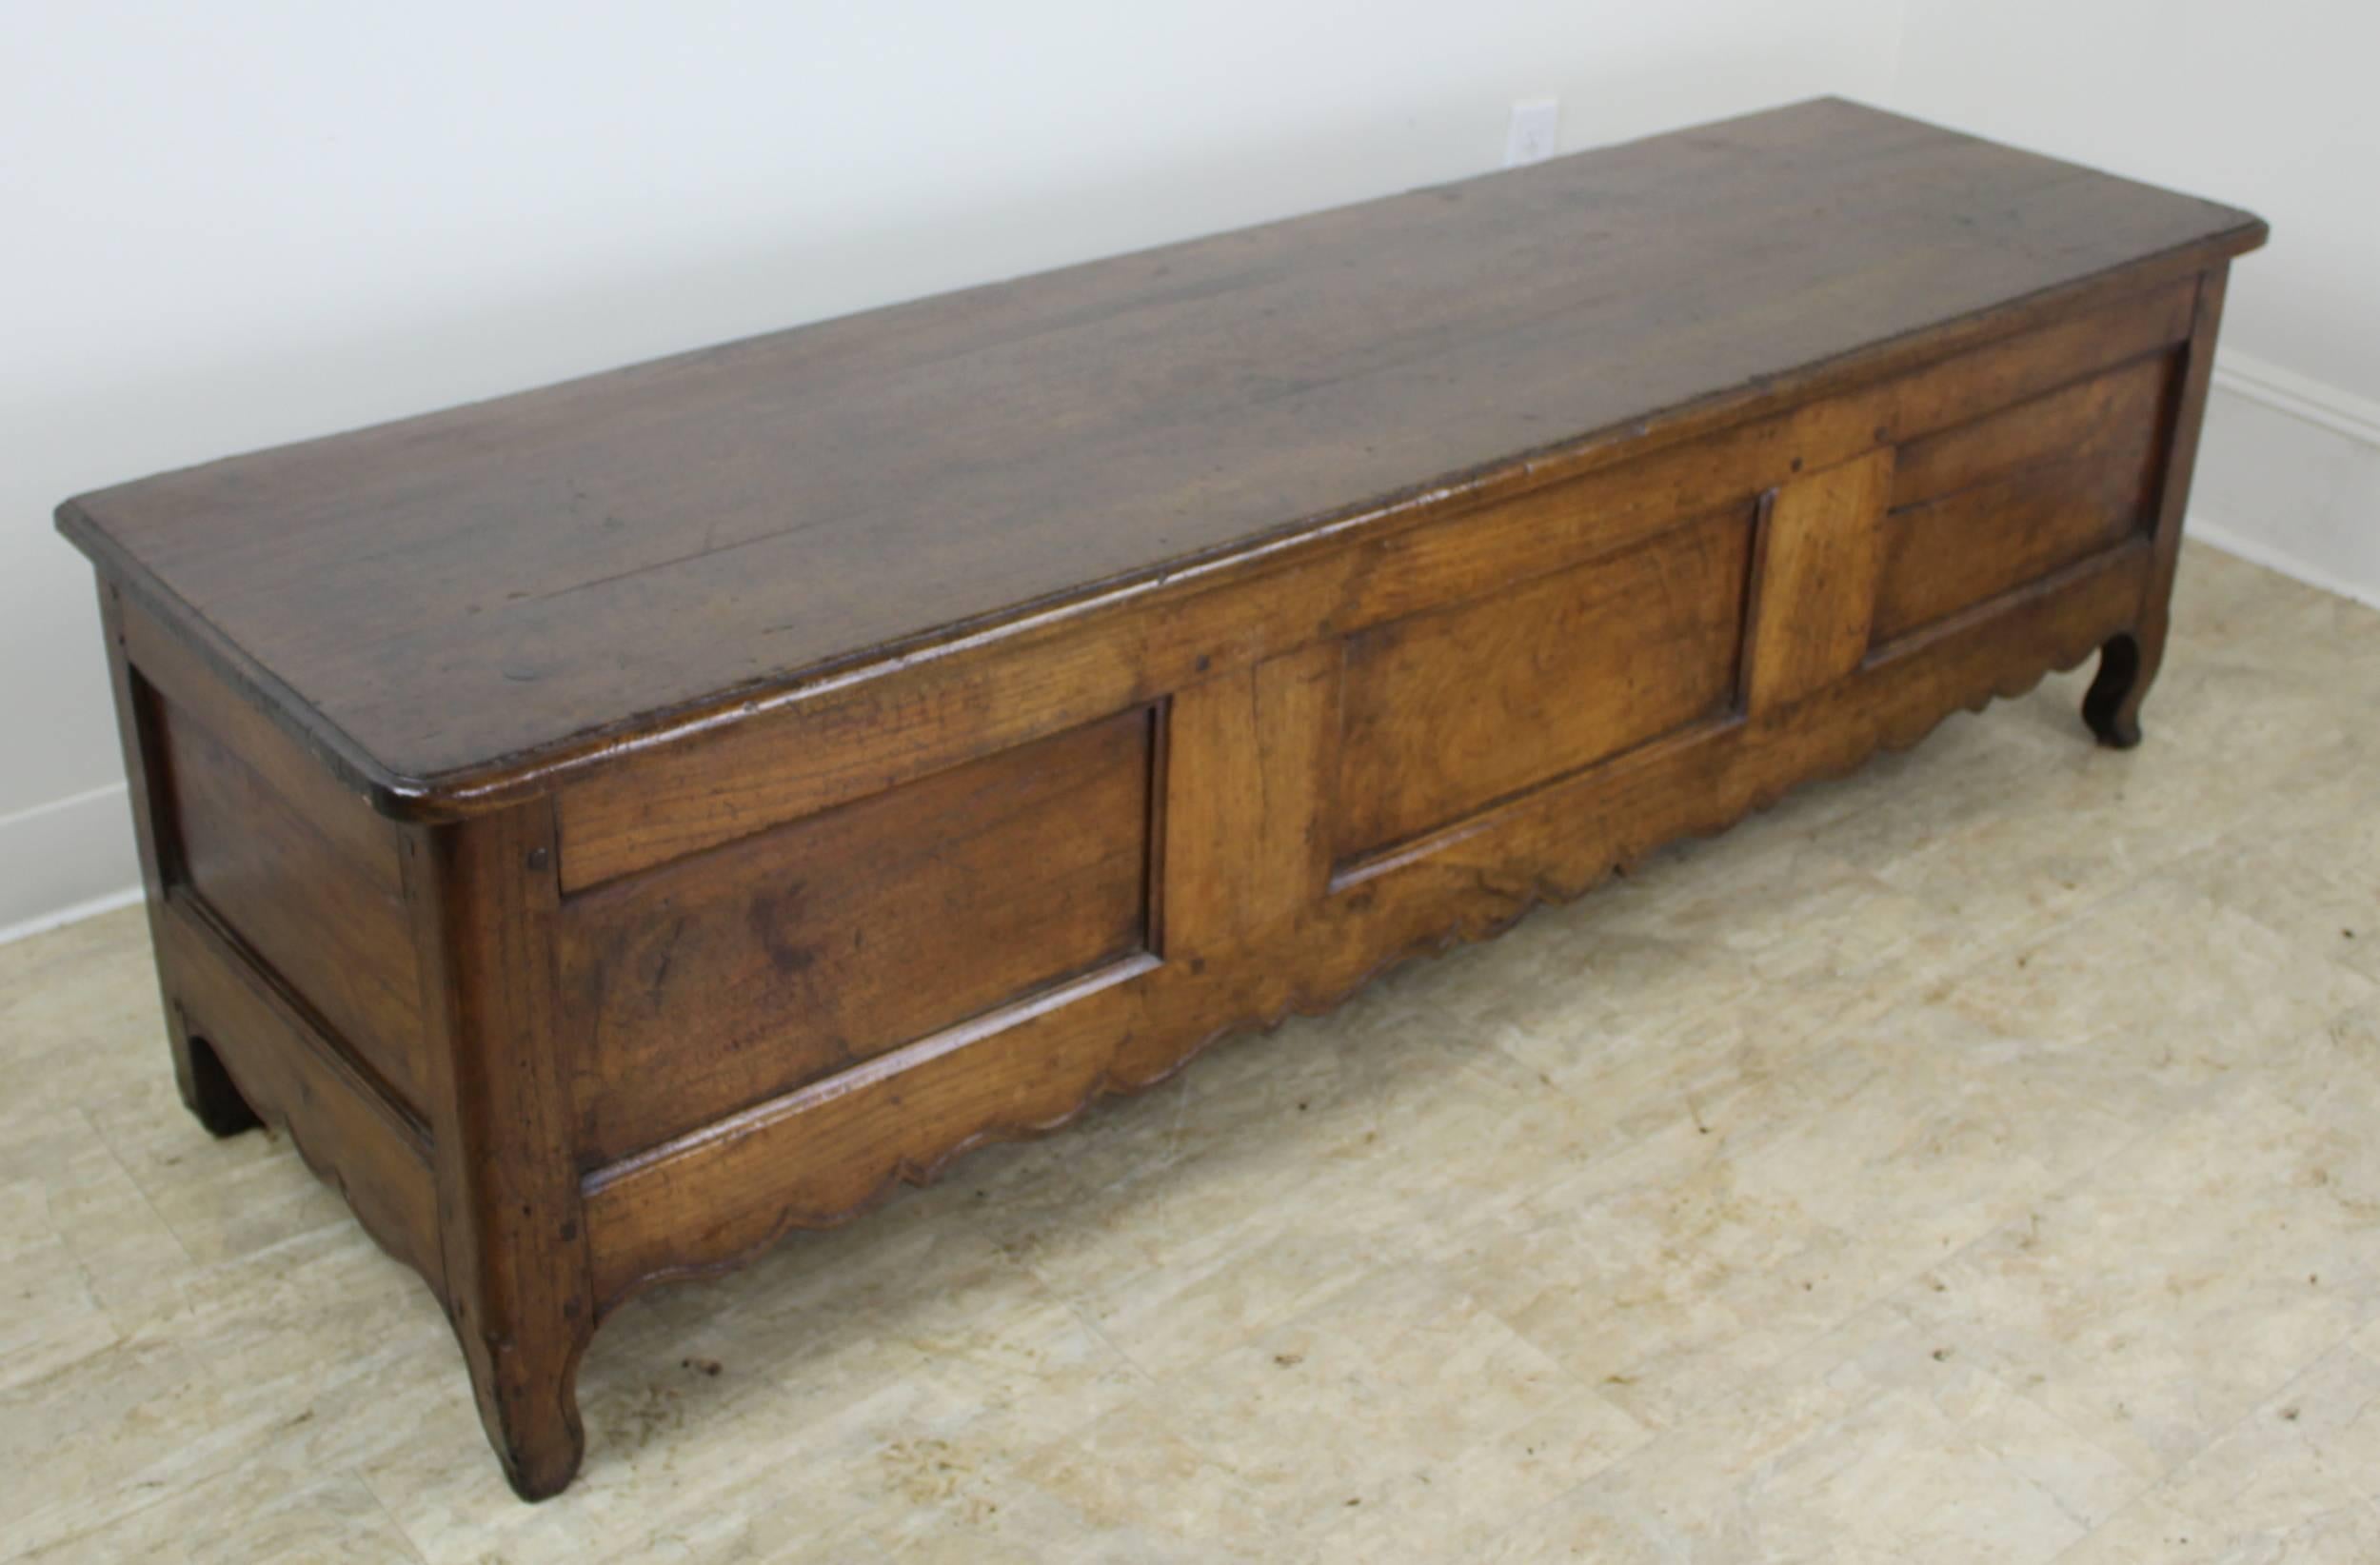 A pretty chestnut coffer or bench with a hinged top and plenty of storage within. Charming carved apron and good color and patina. This piece would be right in the end of a bed, in the entrance hall, or well-appointed mudroom.